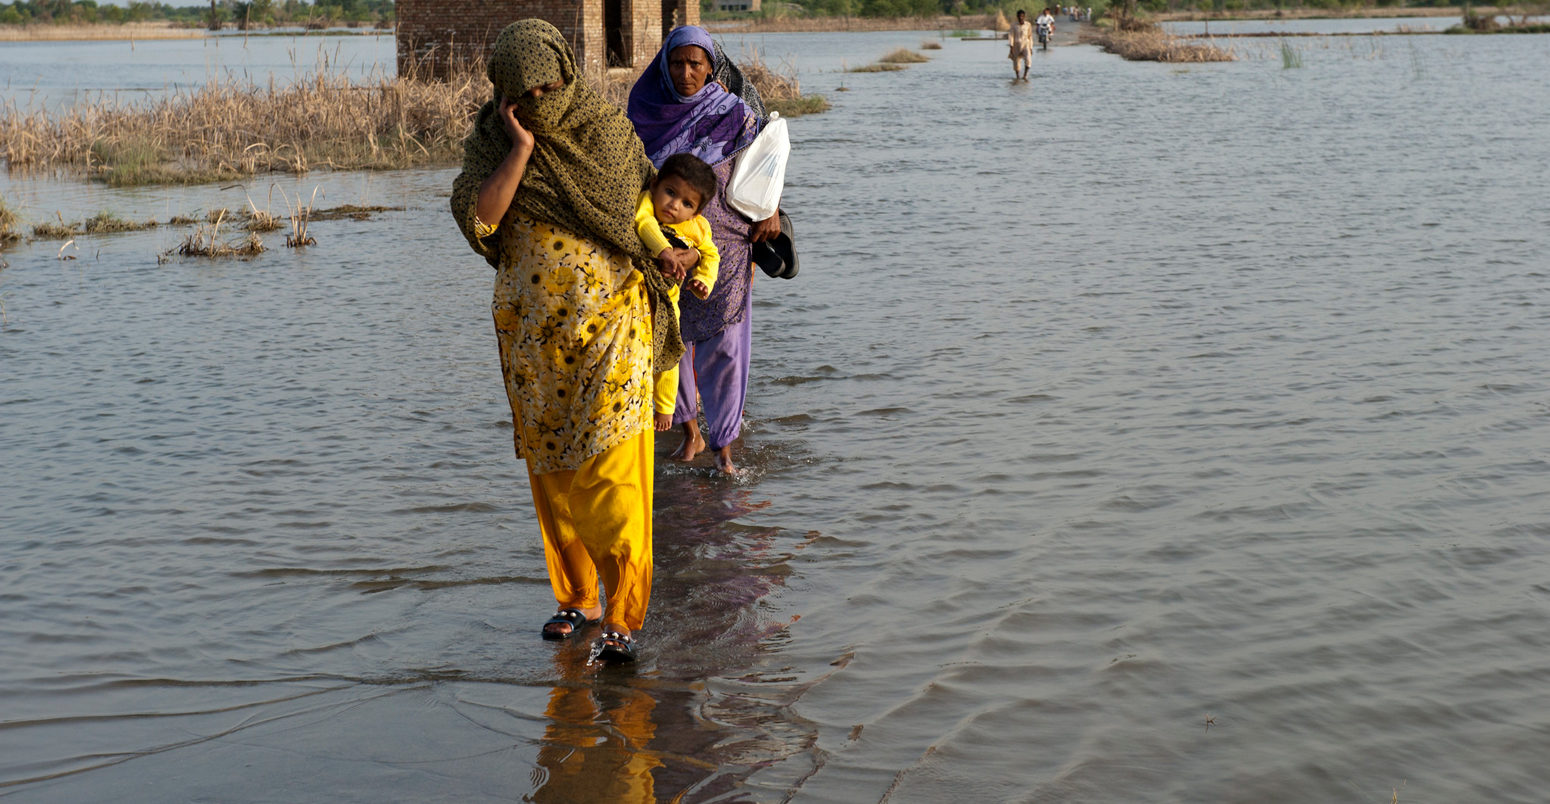 National Flood Emergency Response in Pakistan. A family crosses the flooded streets of Pakistan.